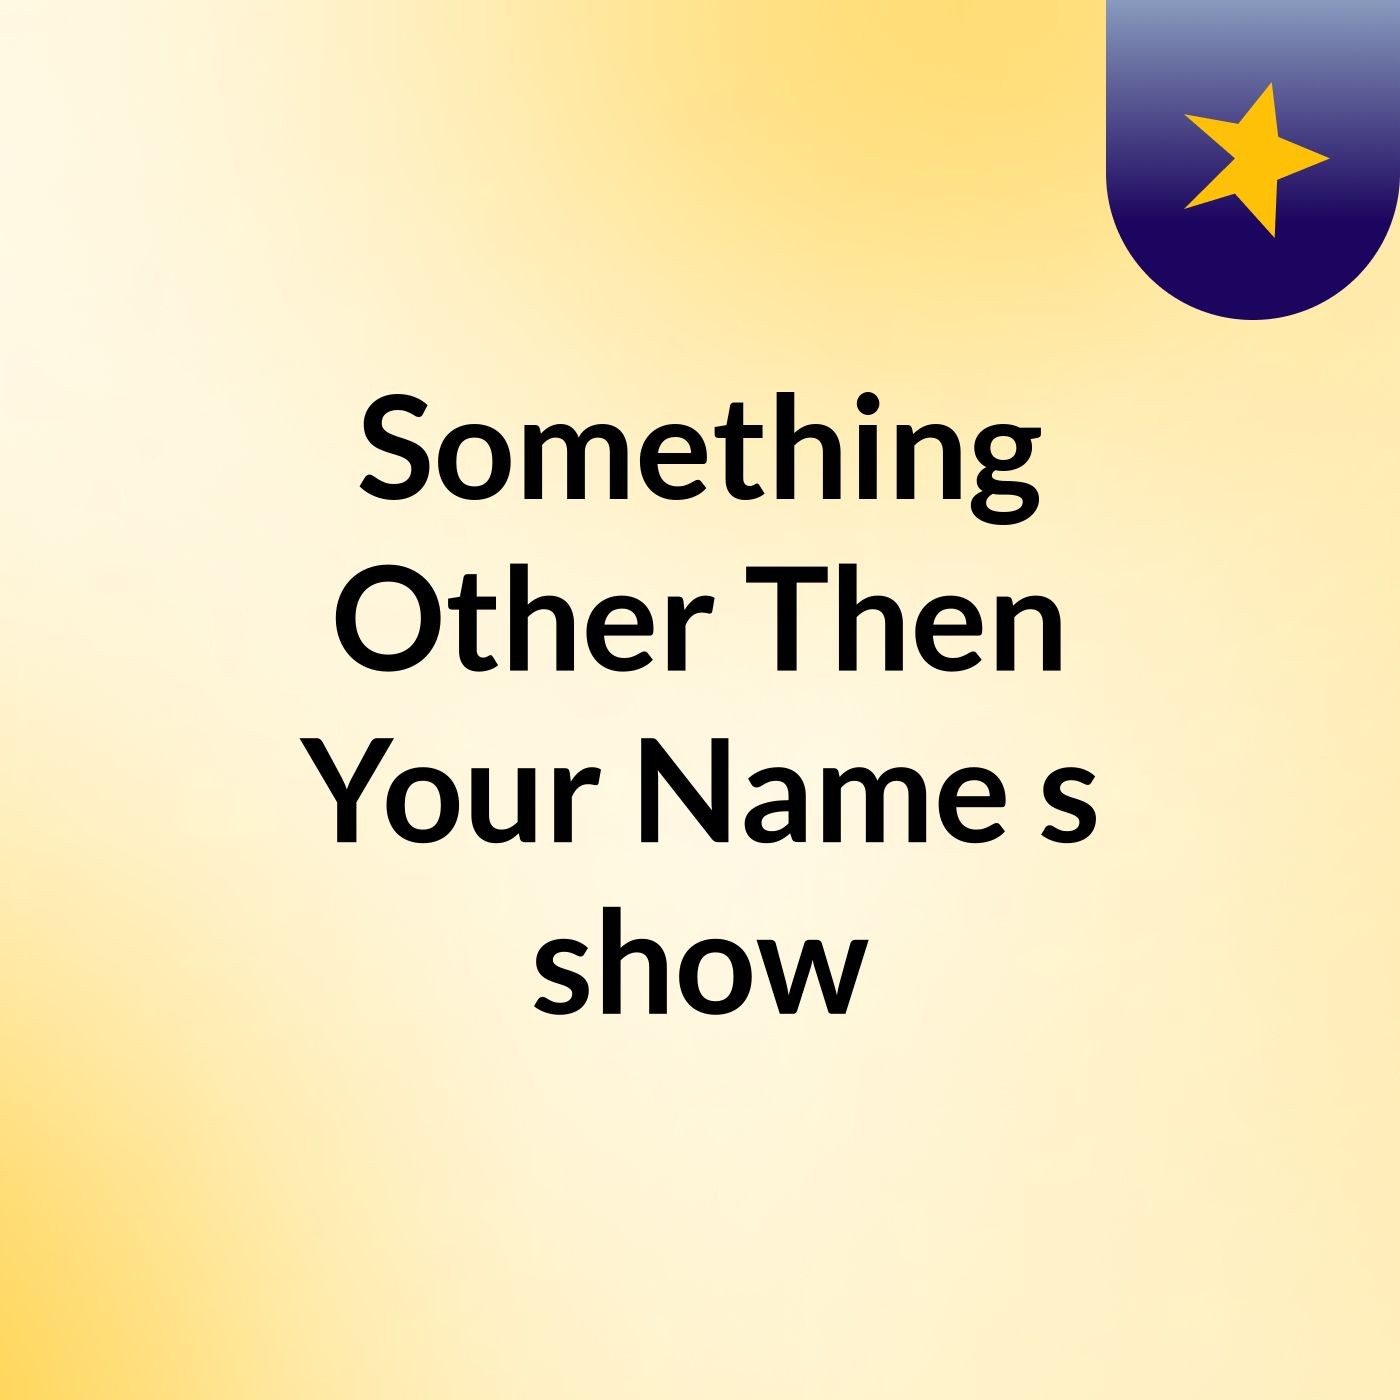 Episode 10 - Something Other Then Your Name's show